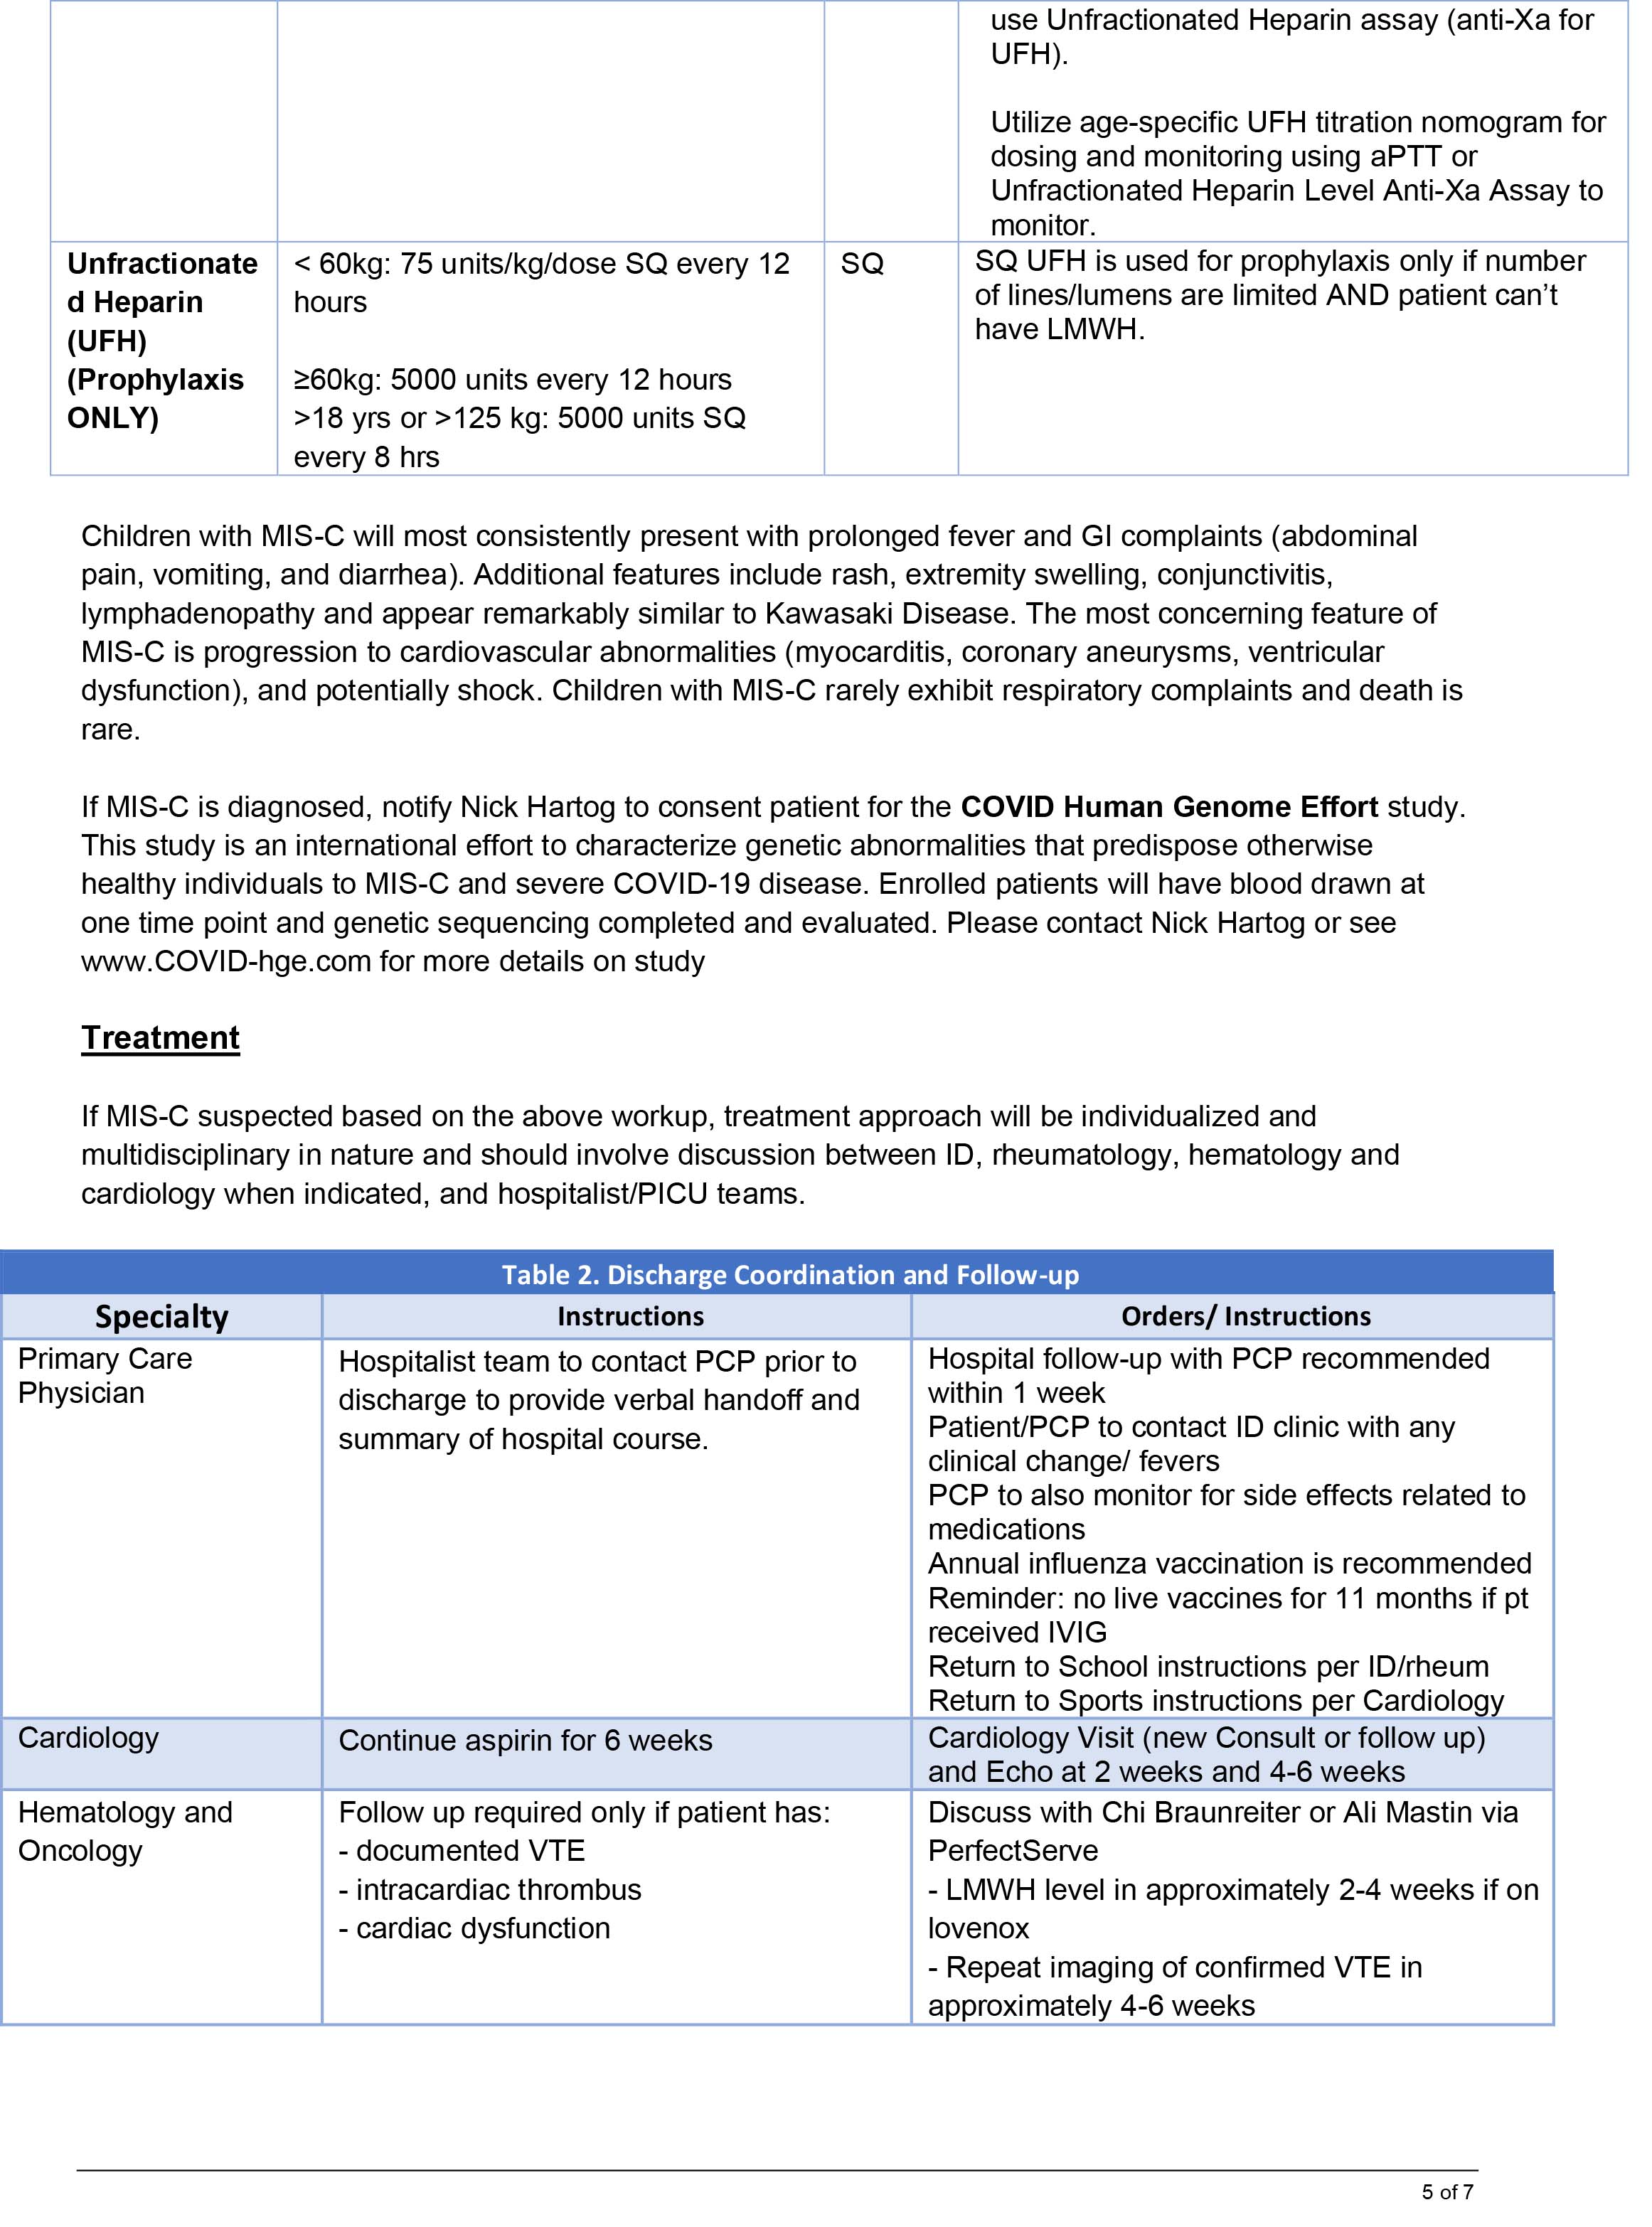 Clinical Guidelines Document Image 5